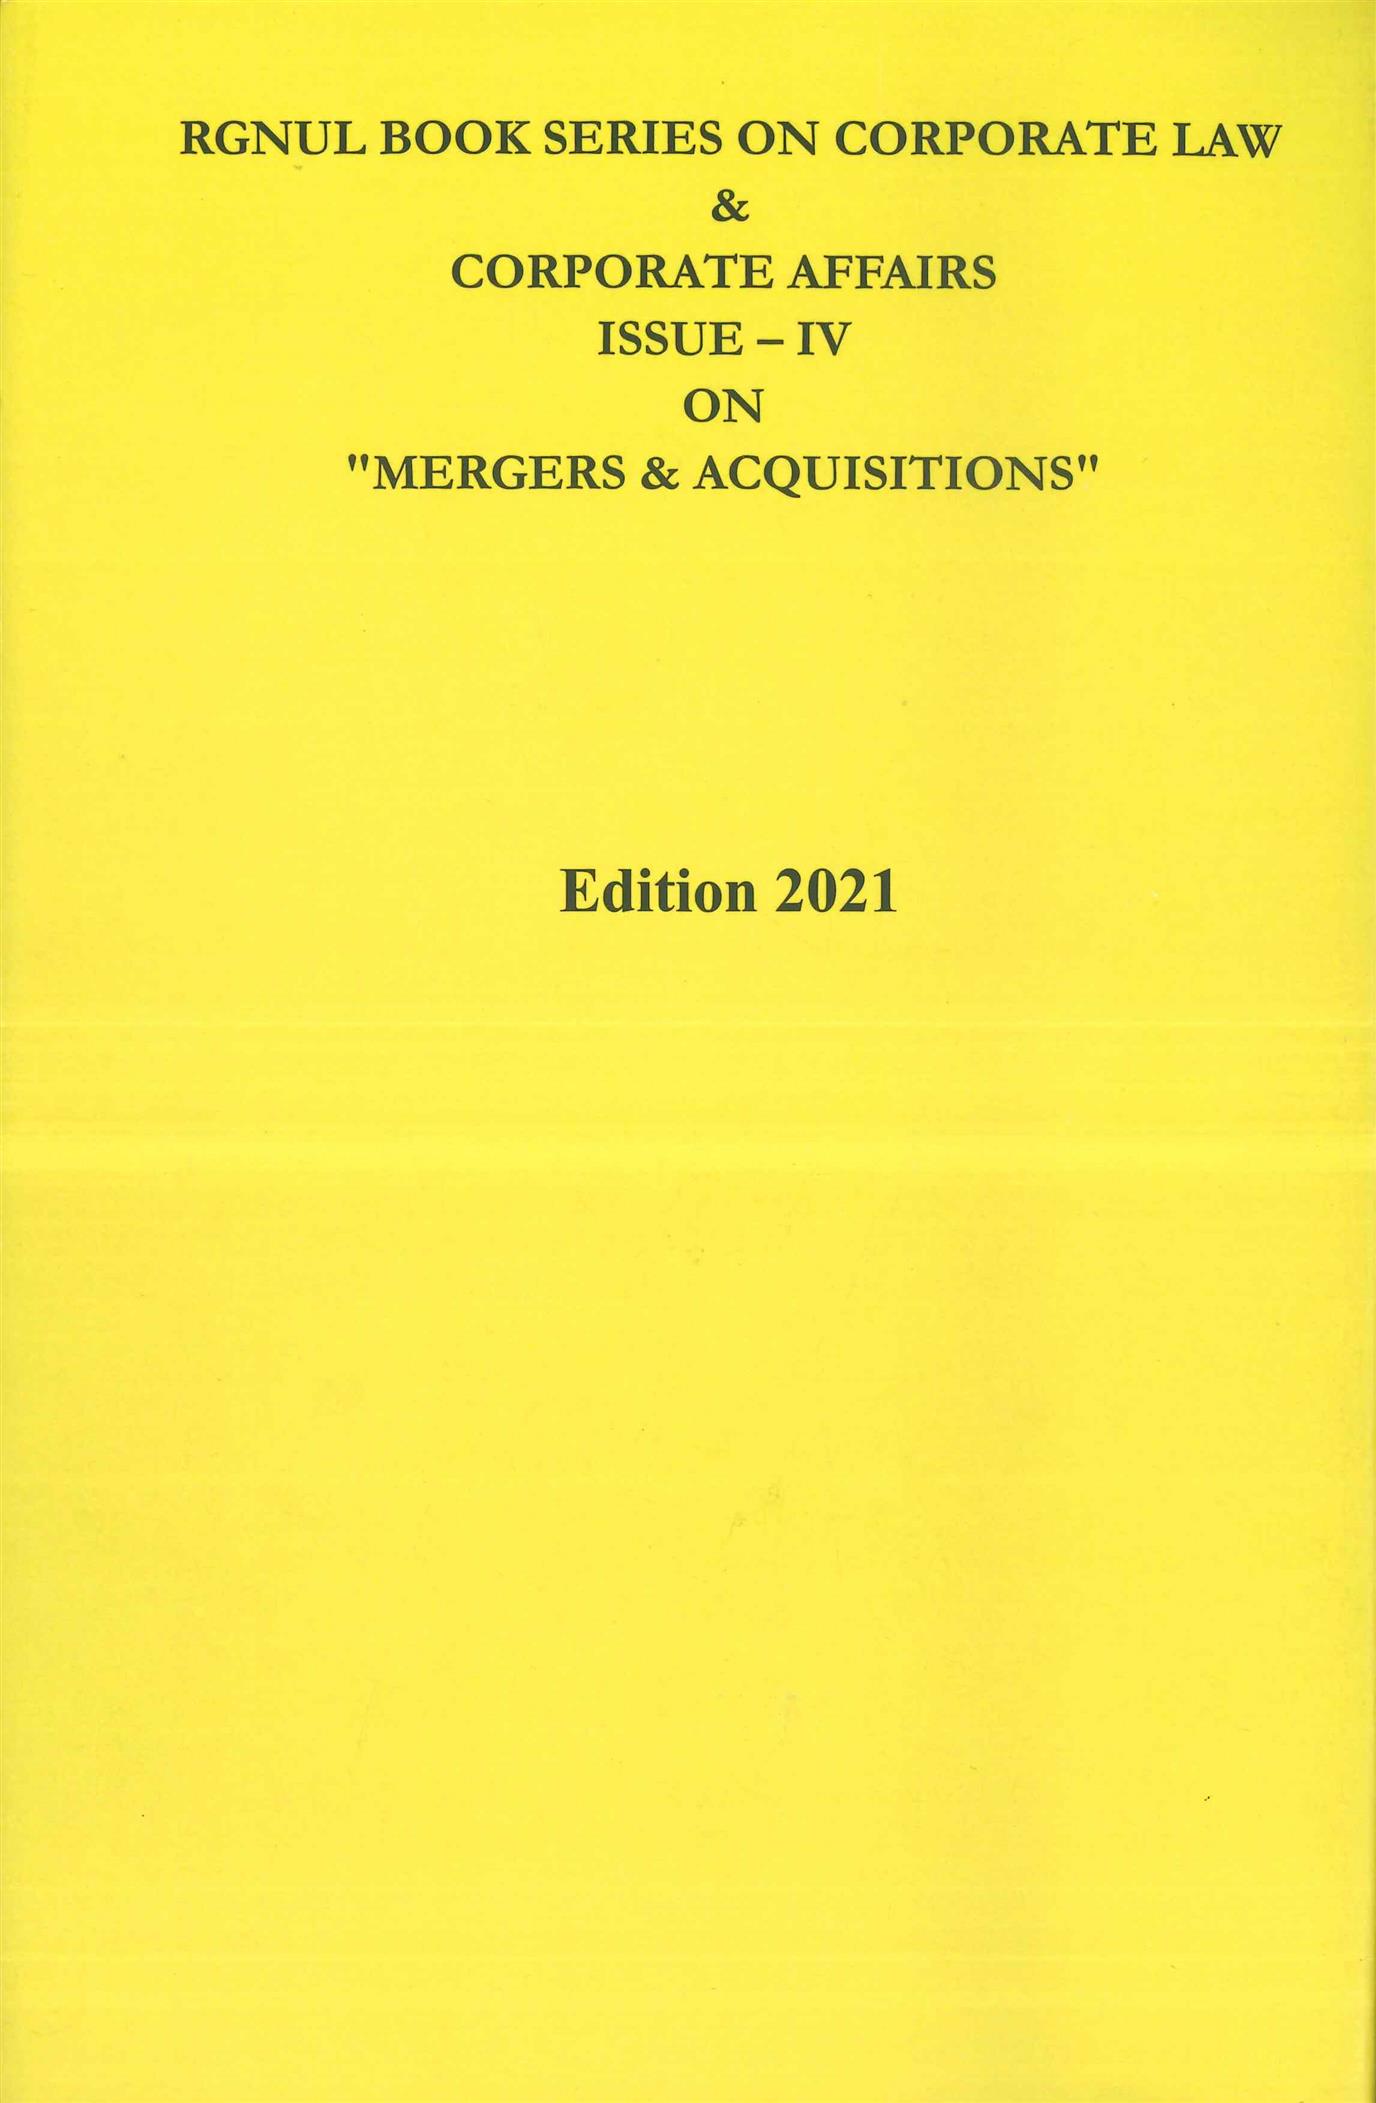 RGNUL Book Series On Corporate Law & Corporate Affairs Issue – IV On Mergers & Acquisitions Author / Edited Book : Prof. (Dr.) Anand Pawar, Prof.(Dr.) Naresh Kumar Vats and Dr. Vipan Kumar